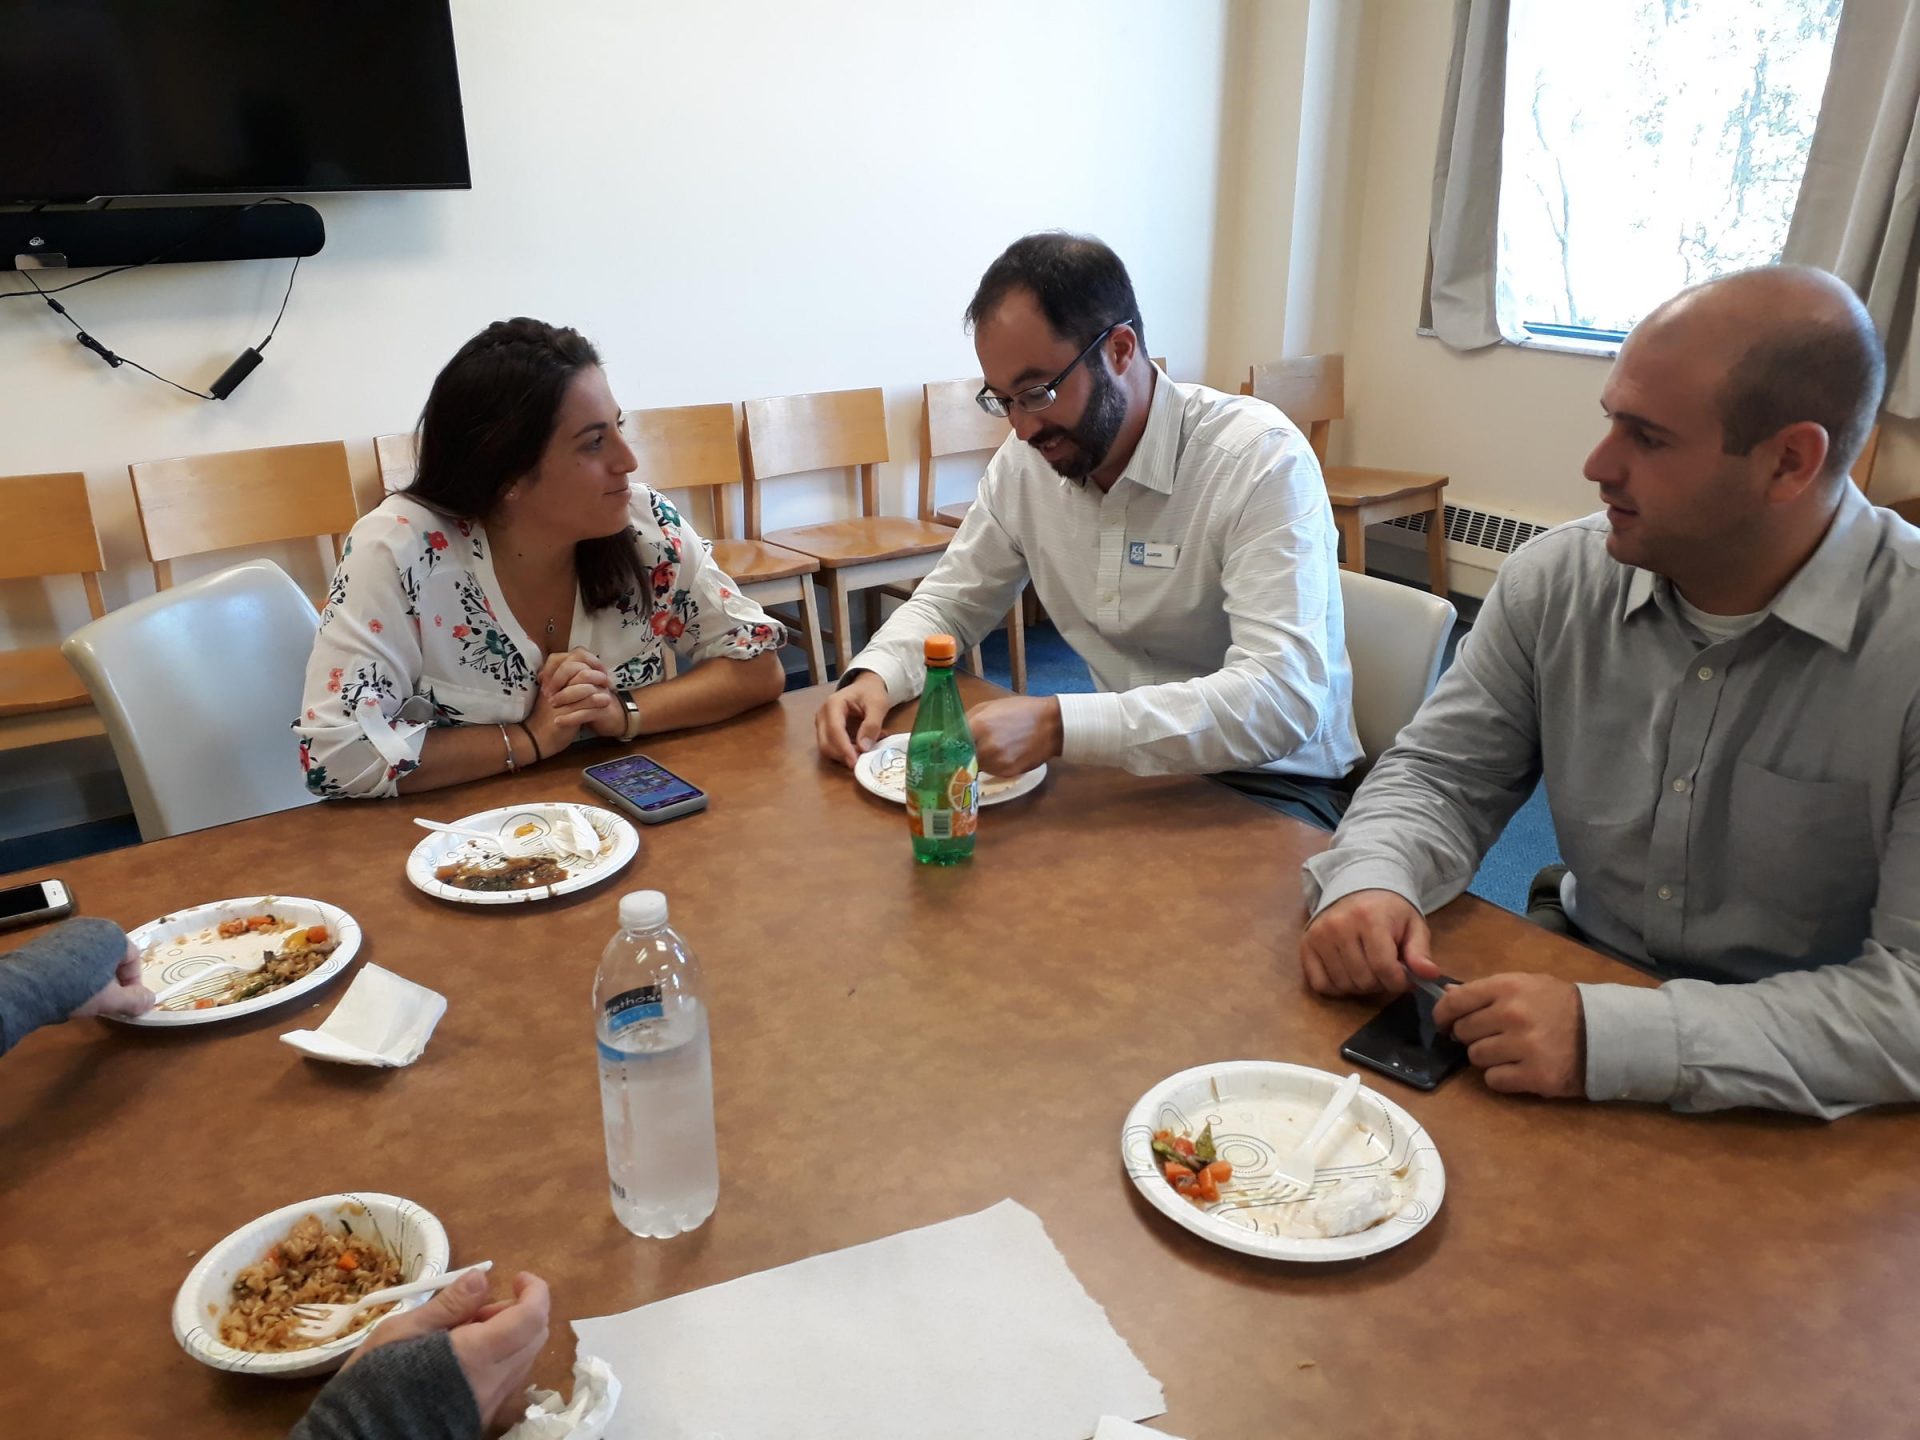 JCC staff eating lunch. The big Burrito Restaurant Group has been providing a weekly catered meal to employees of the community center since the attack at the Tree of Life Synagogue.